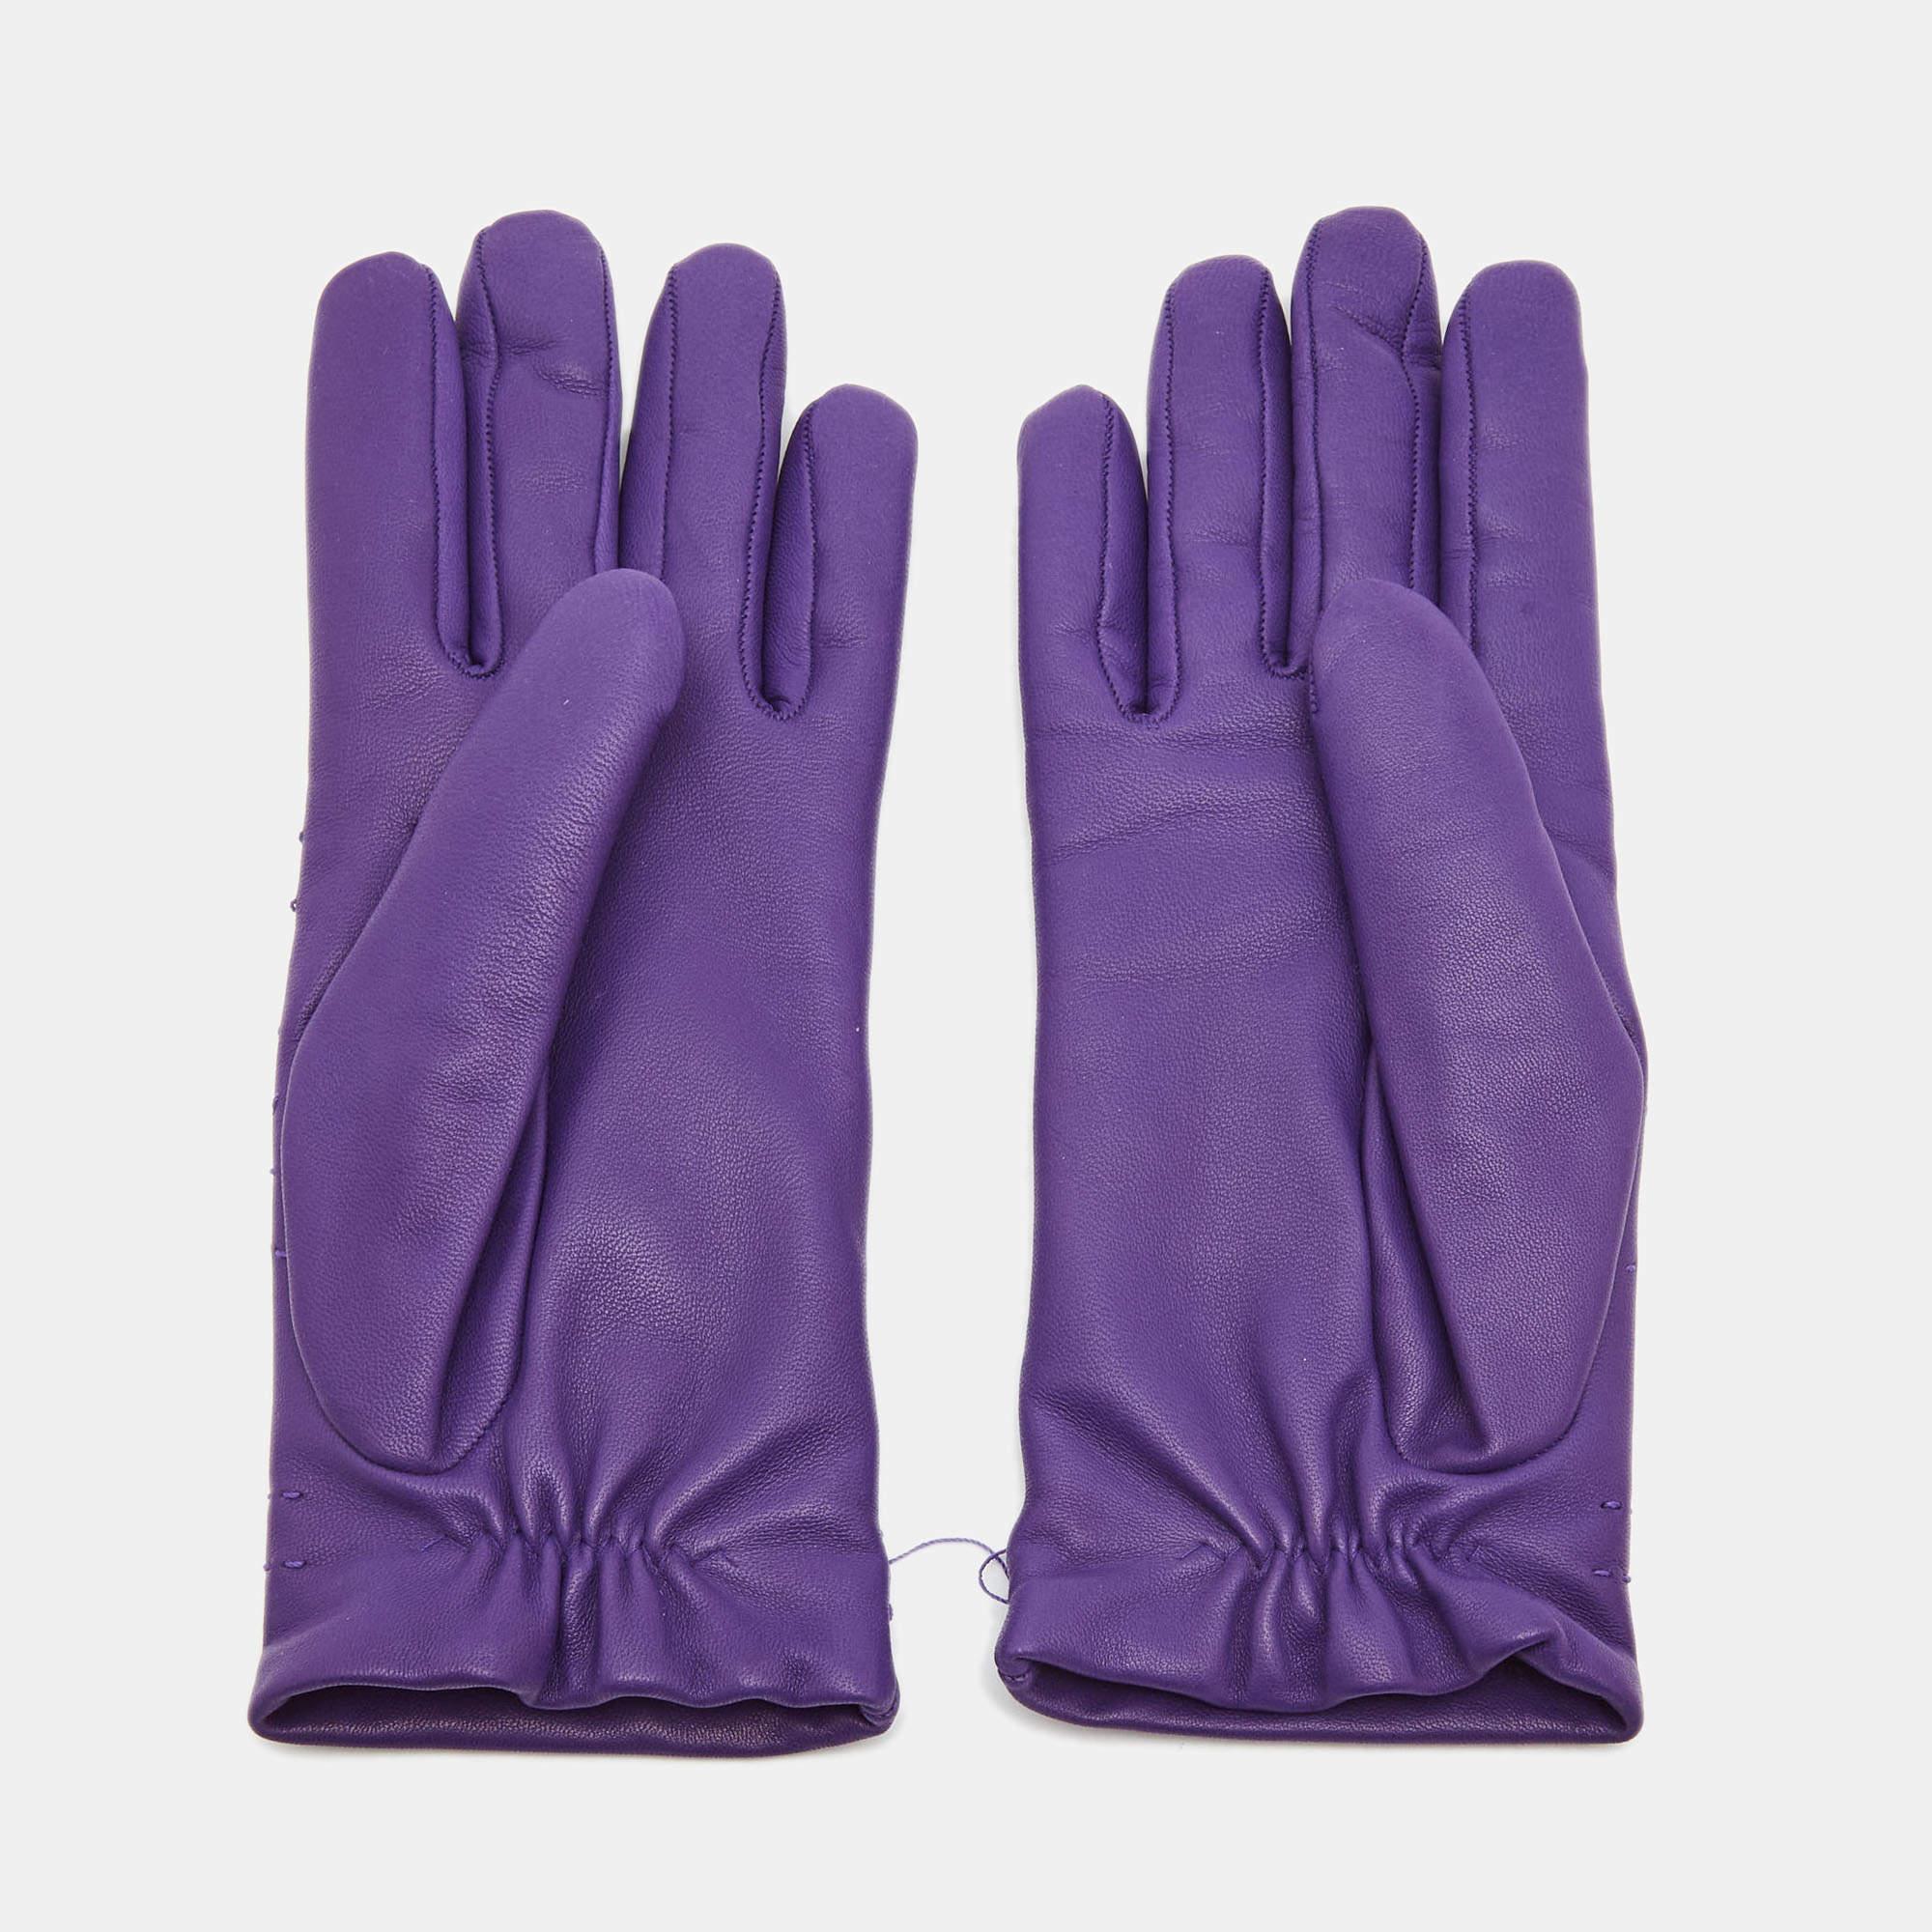 Prepare for cold winter days and nights with this pair of authentic Hermès gloves. The gloves are sewn using purple leather and added with tonal stitching.

Includes: Original Box, Info Booklet

